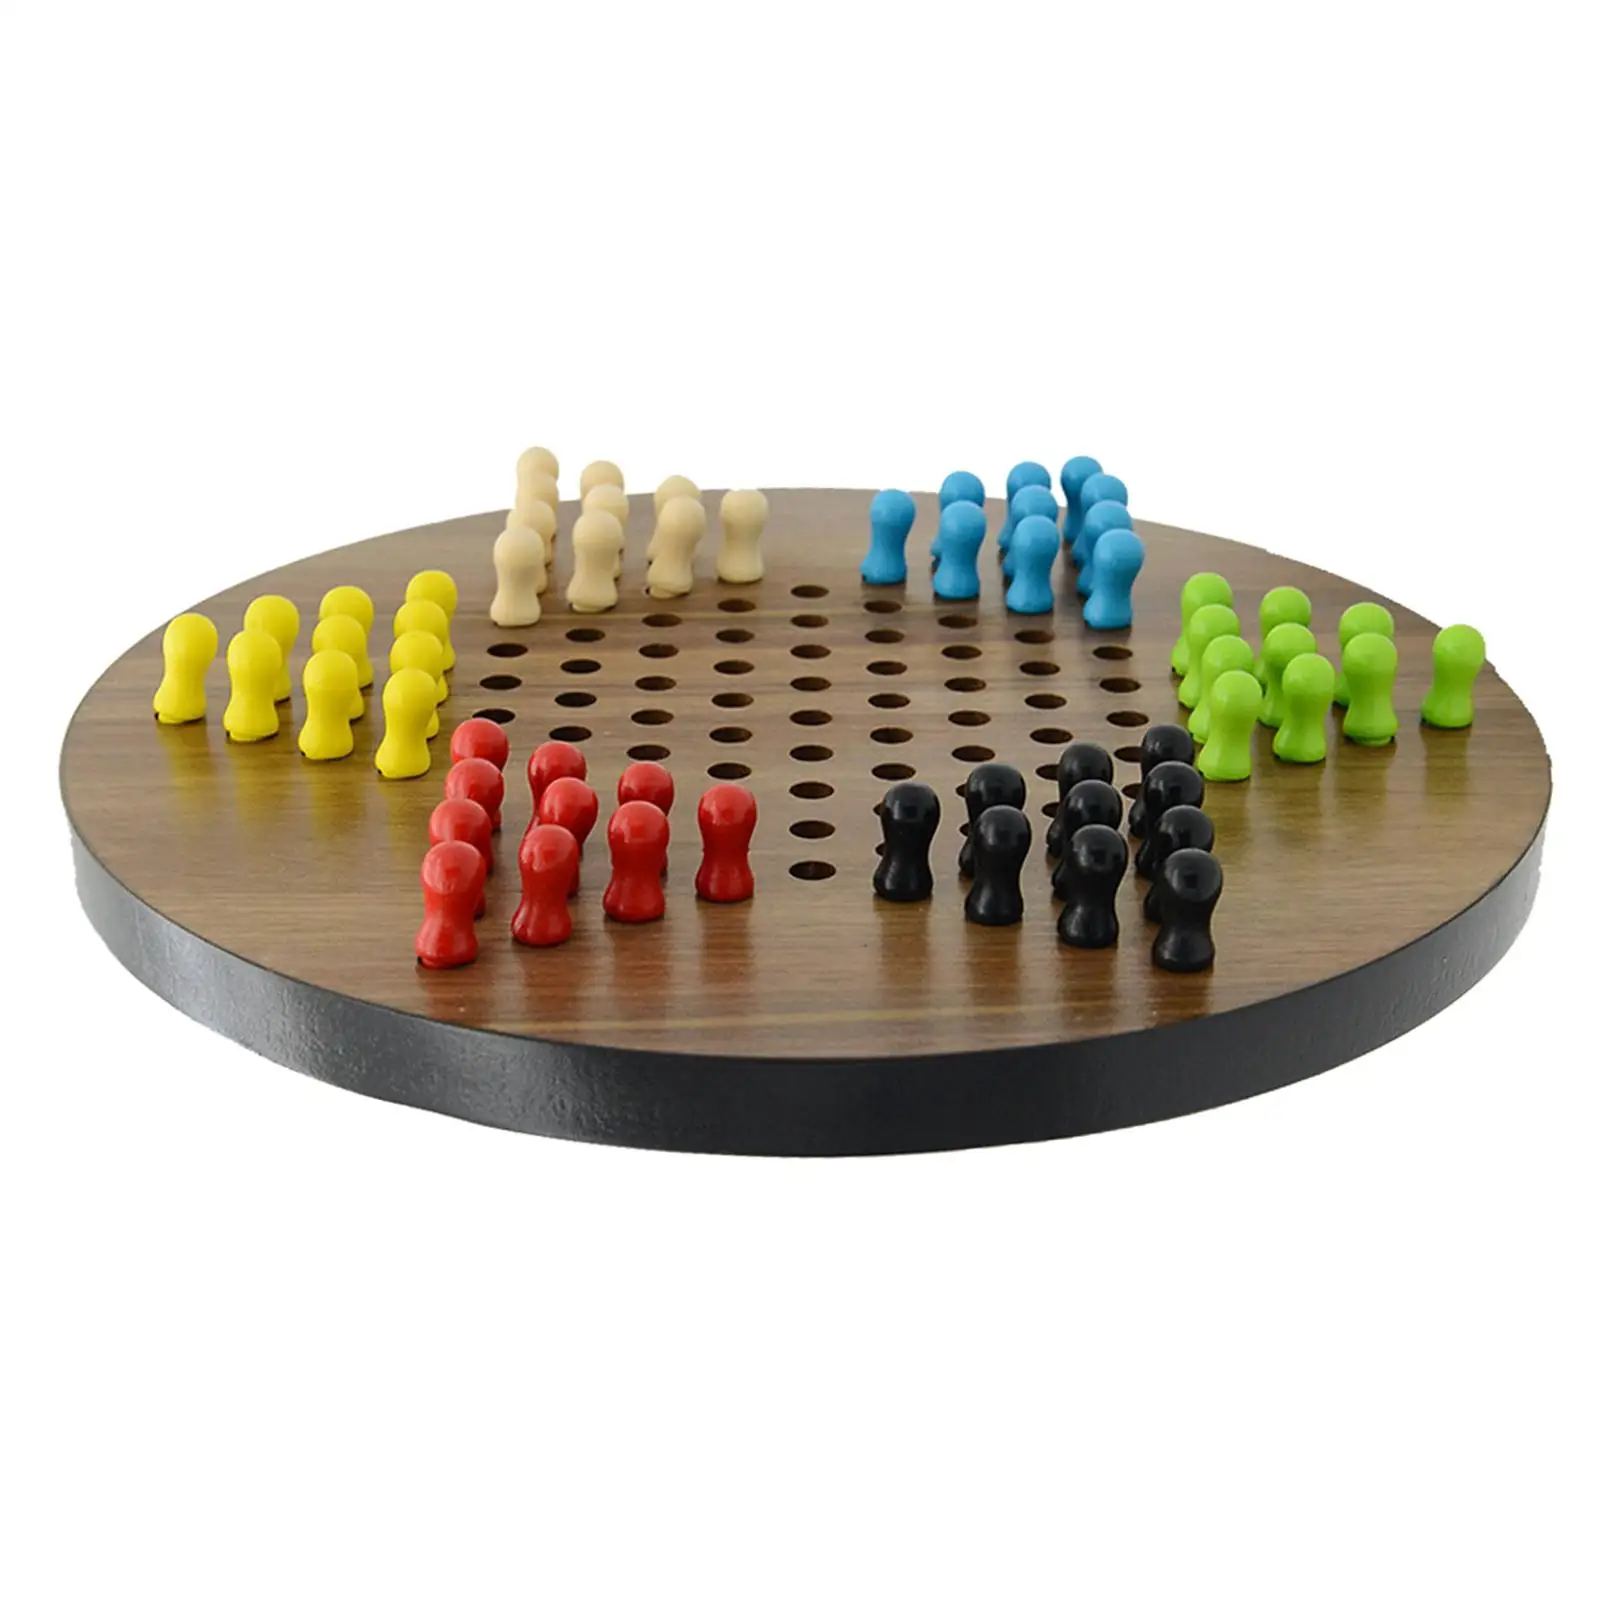 Chinese Checkers Game Includes 60 Colorful Wooden Board Game Chinese Checkers with Marbles for Preschool Children Kids Toddler